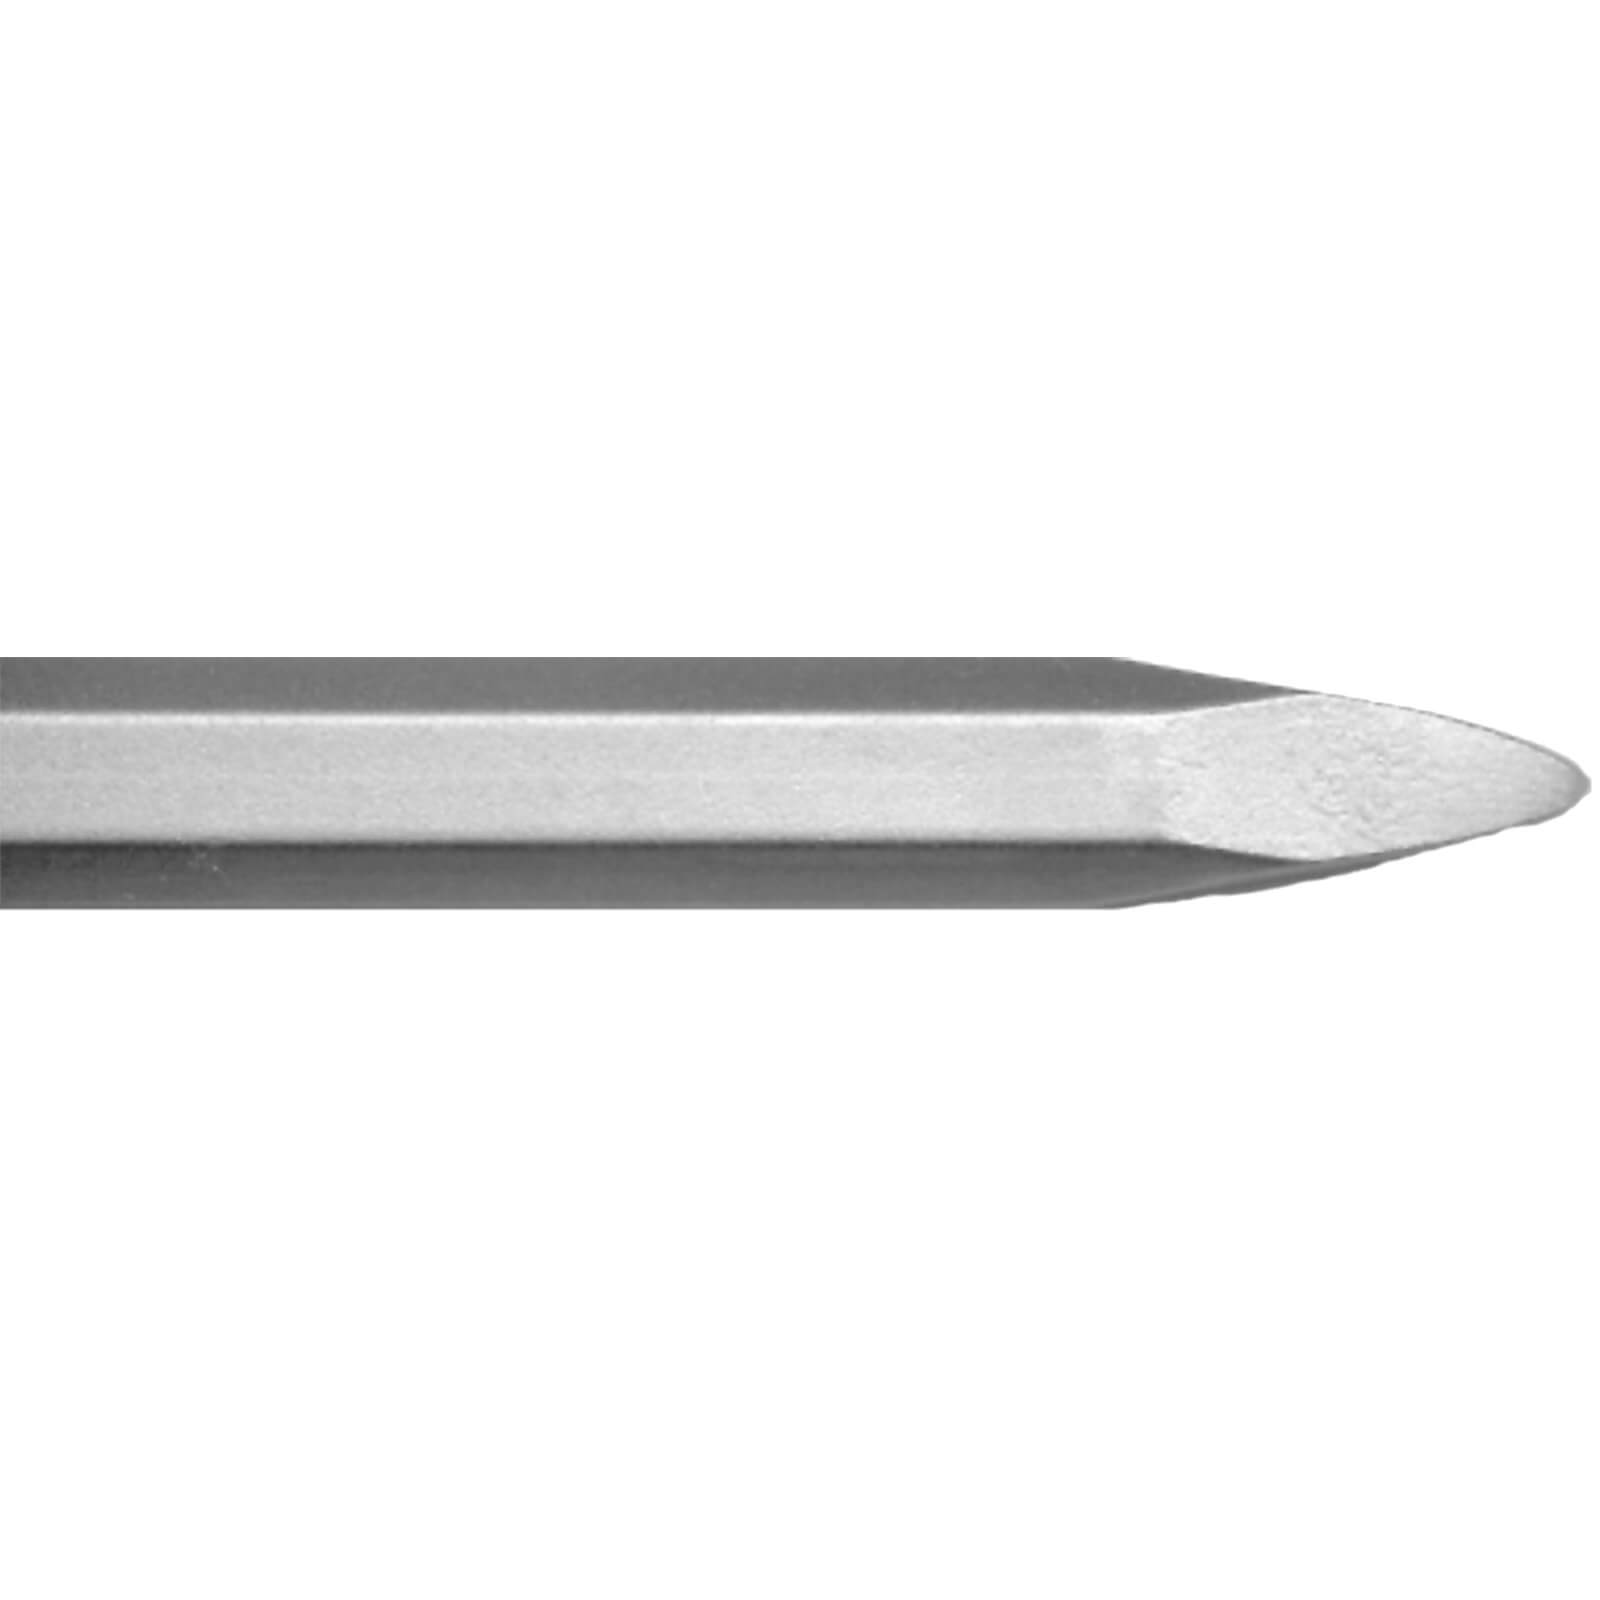 Photo of Irwin Speedhammer Plus Pointed Chisel - 250mm